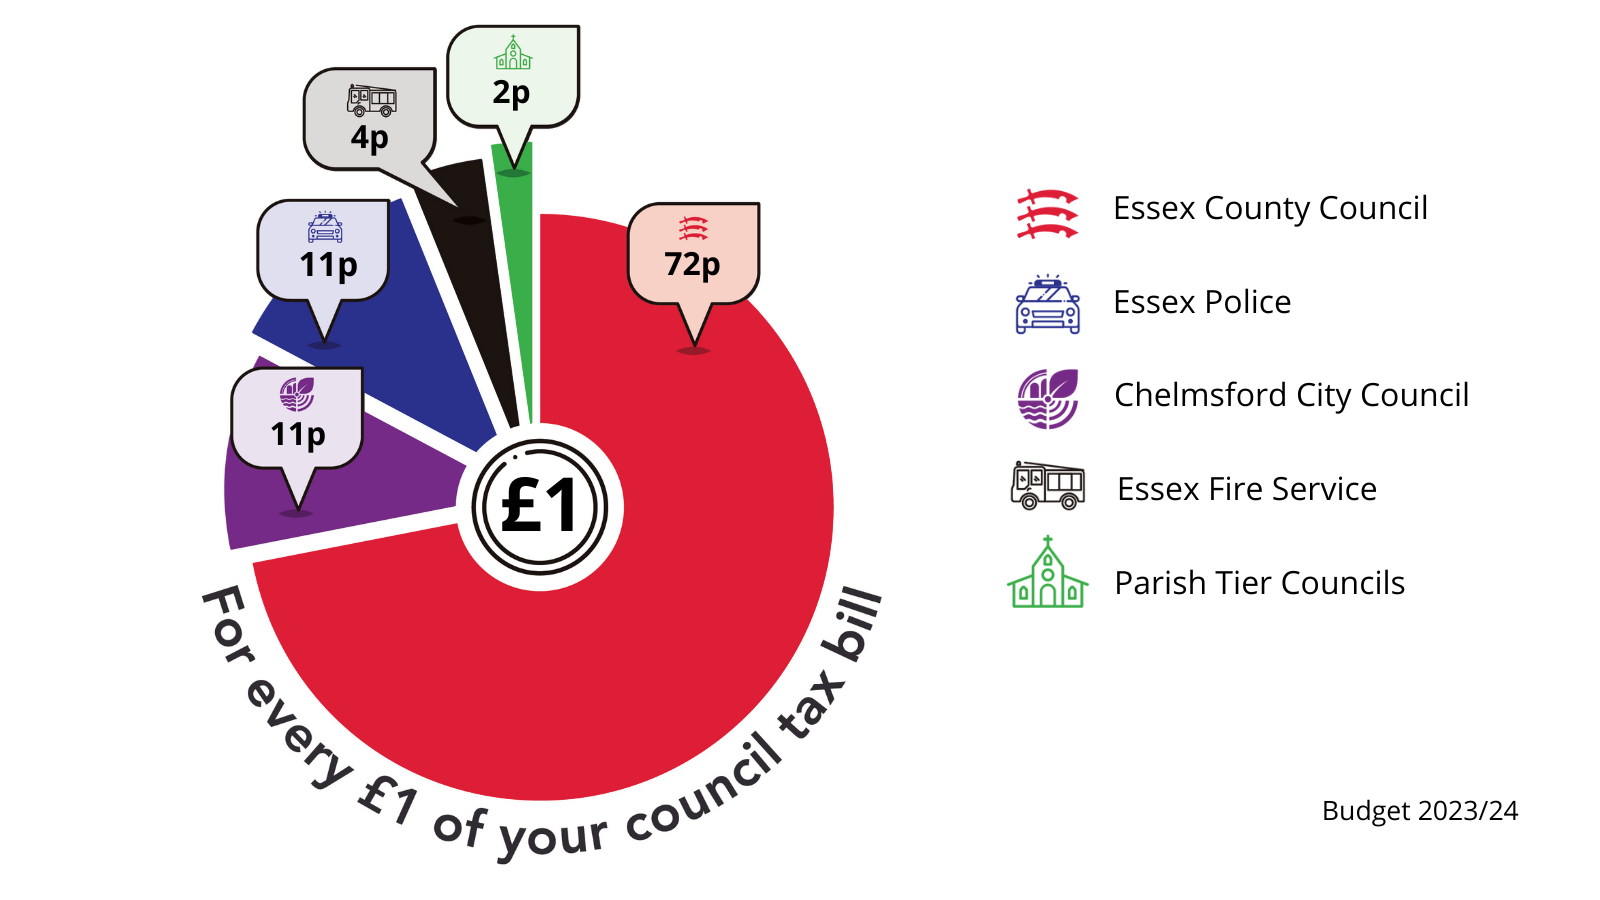 How £1 of Council Tax is split